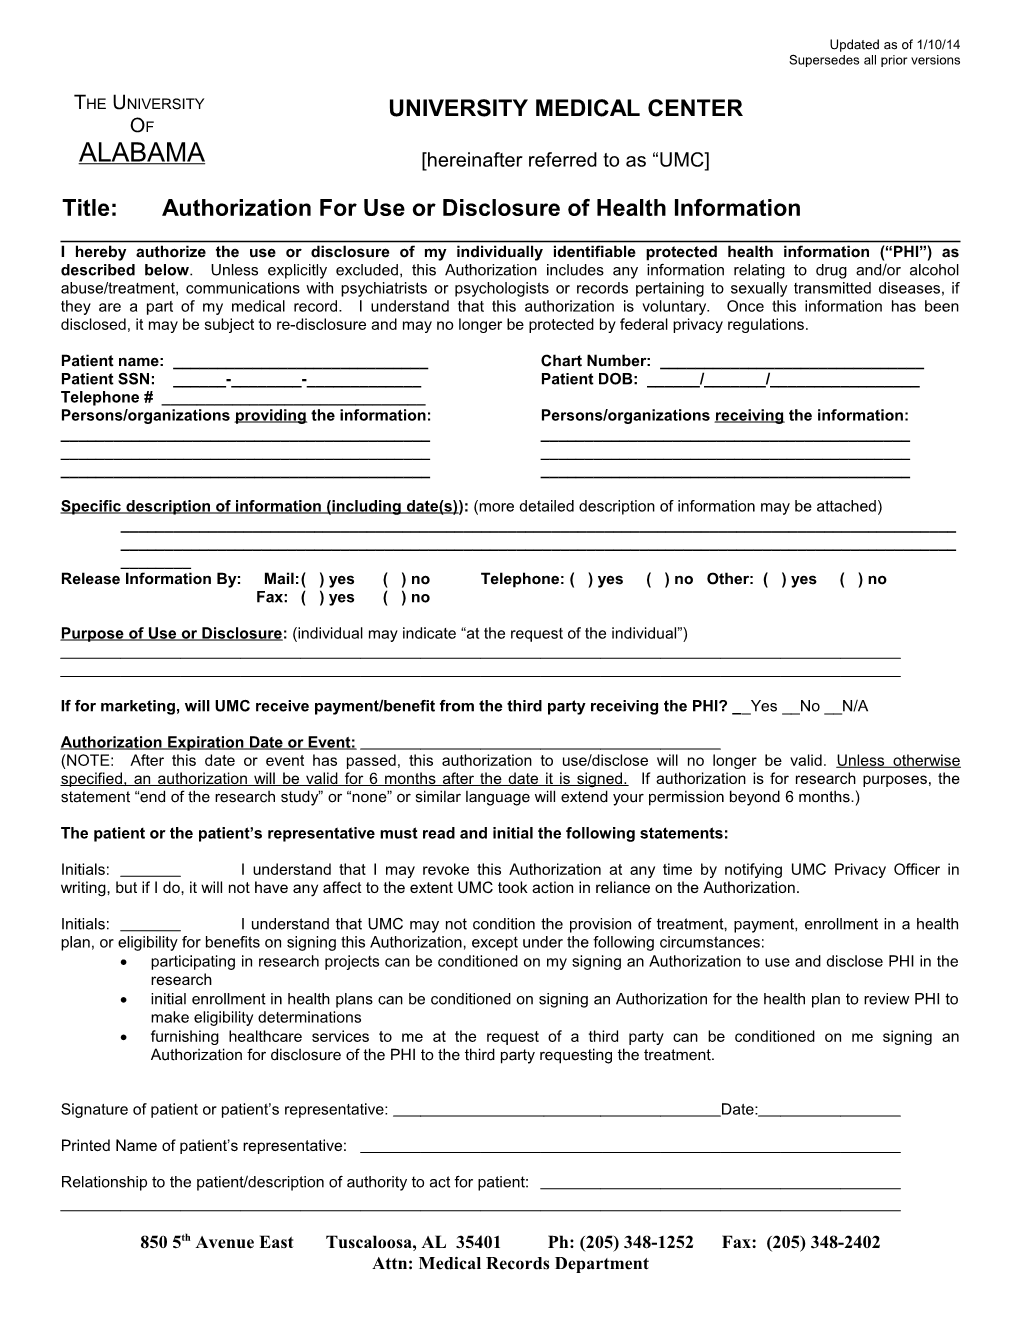 Attachment A: Authorization for Use and Disclosure of Health Information